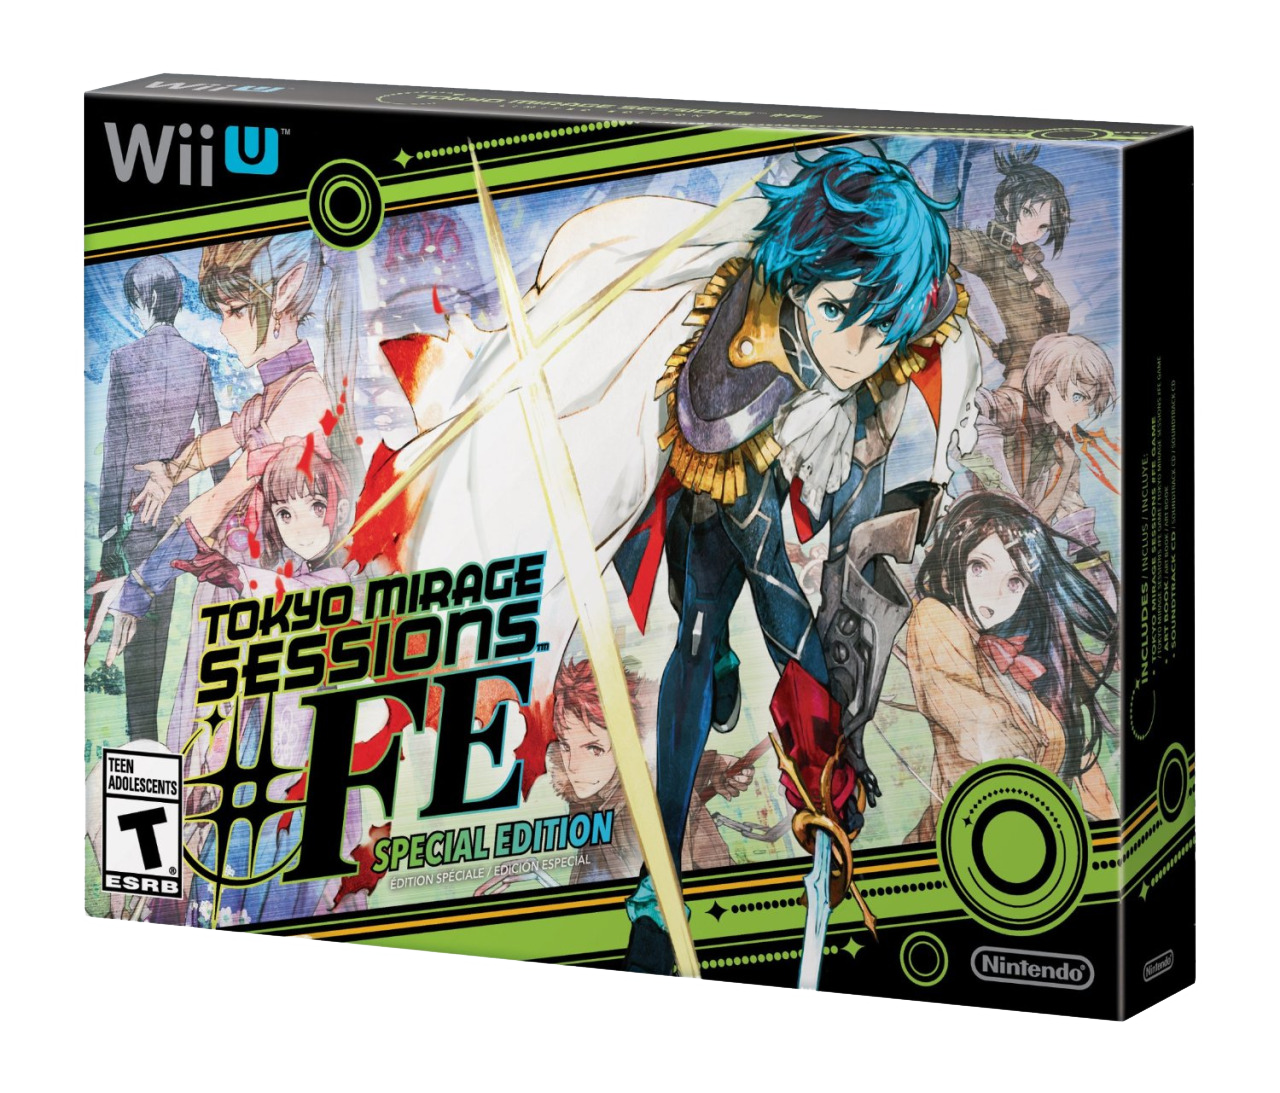 Amazing Tokyo Mirage Sessions #FE Pictures & Backgrounds